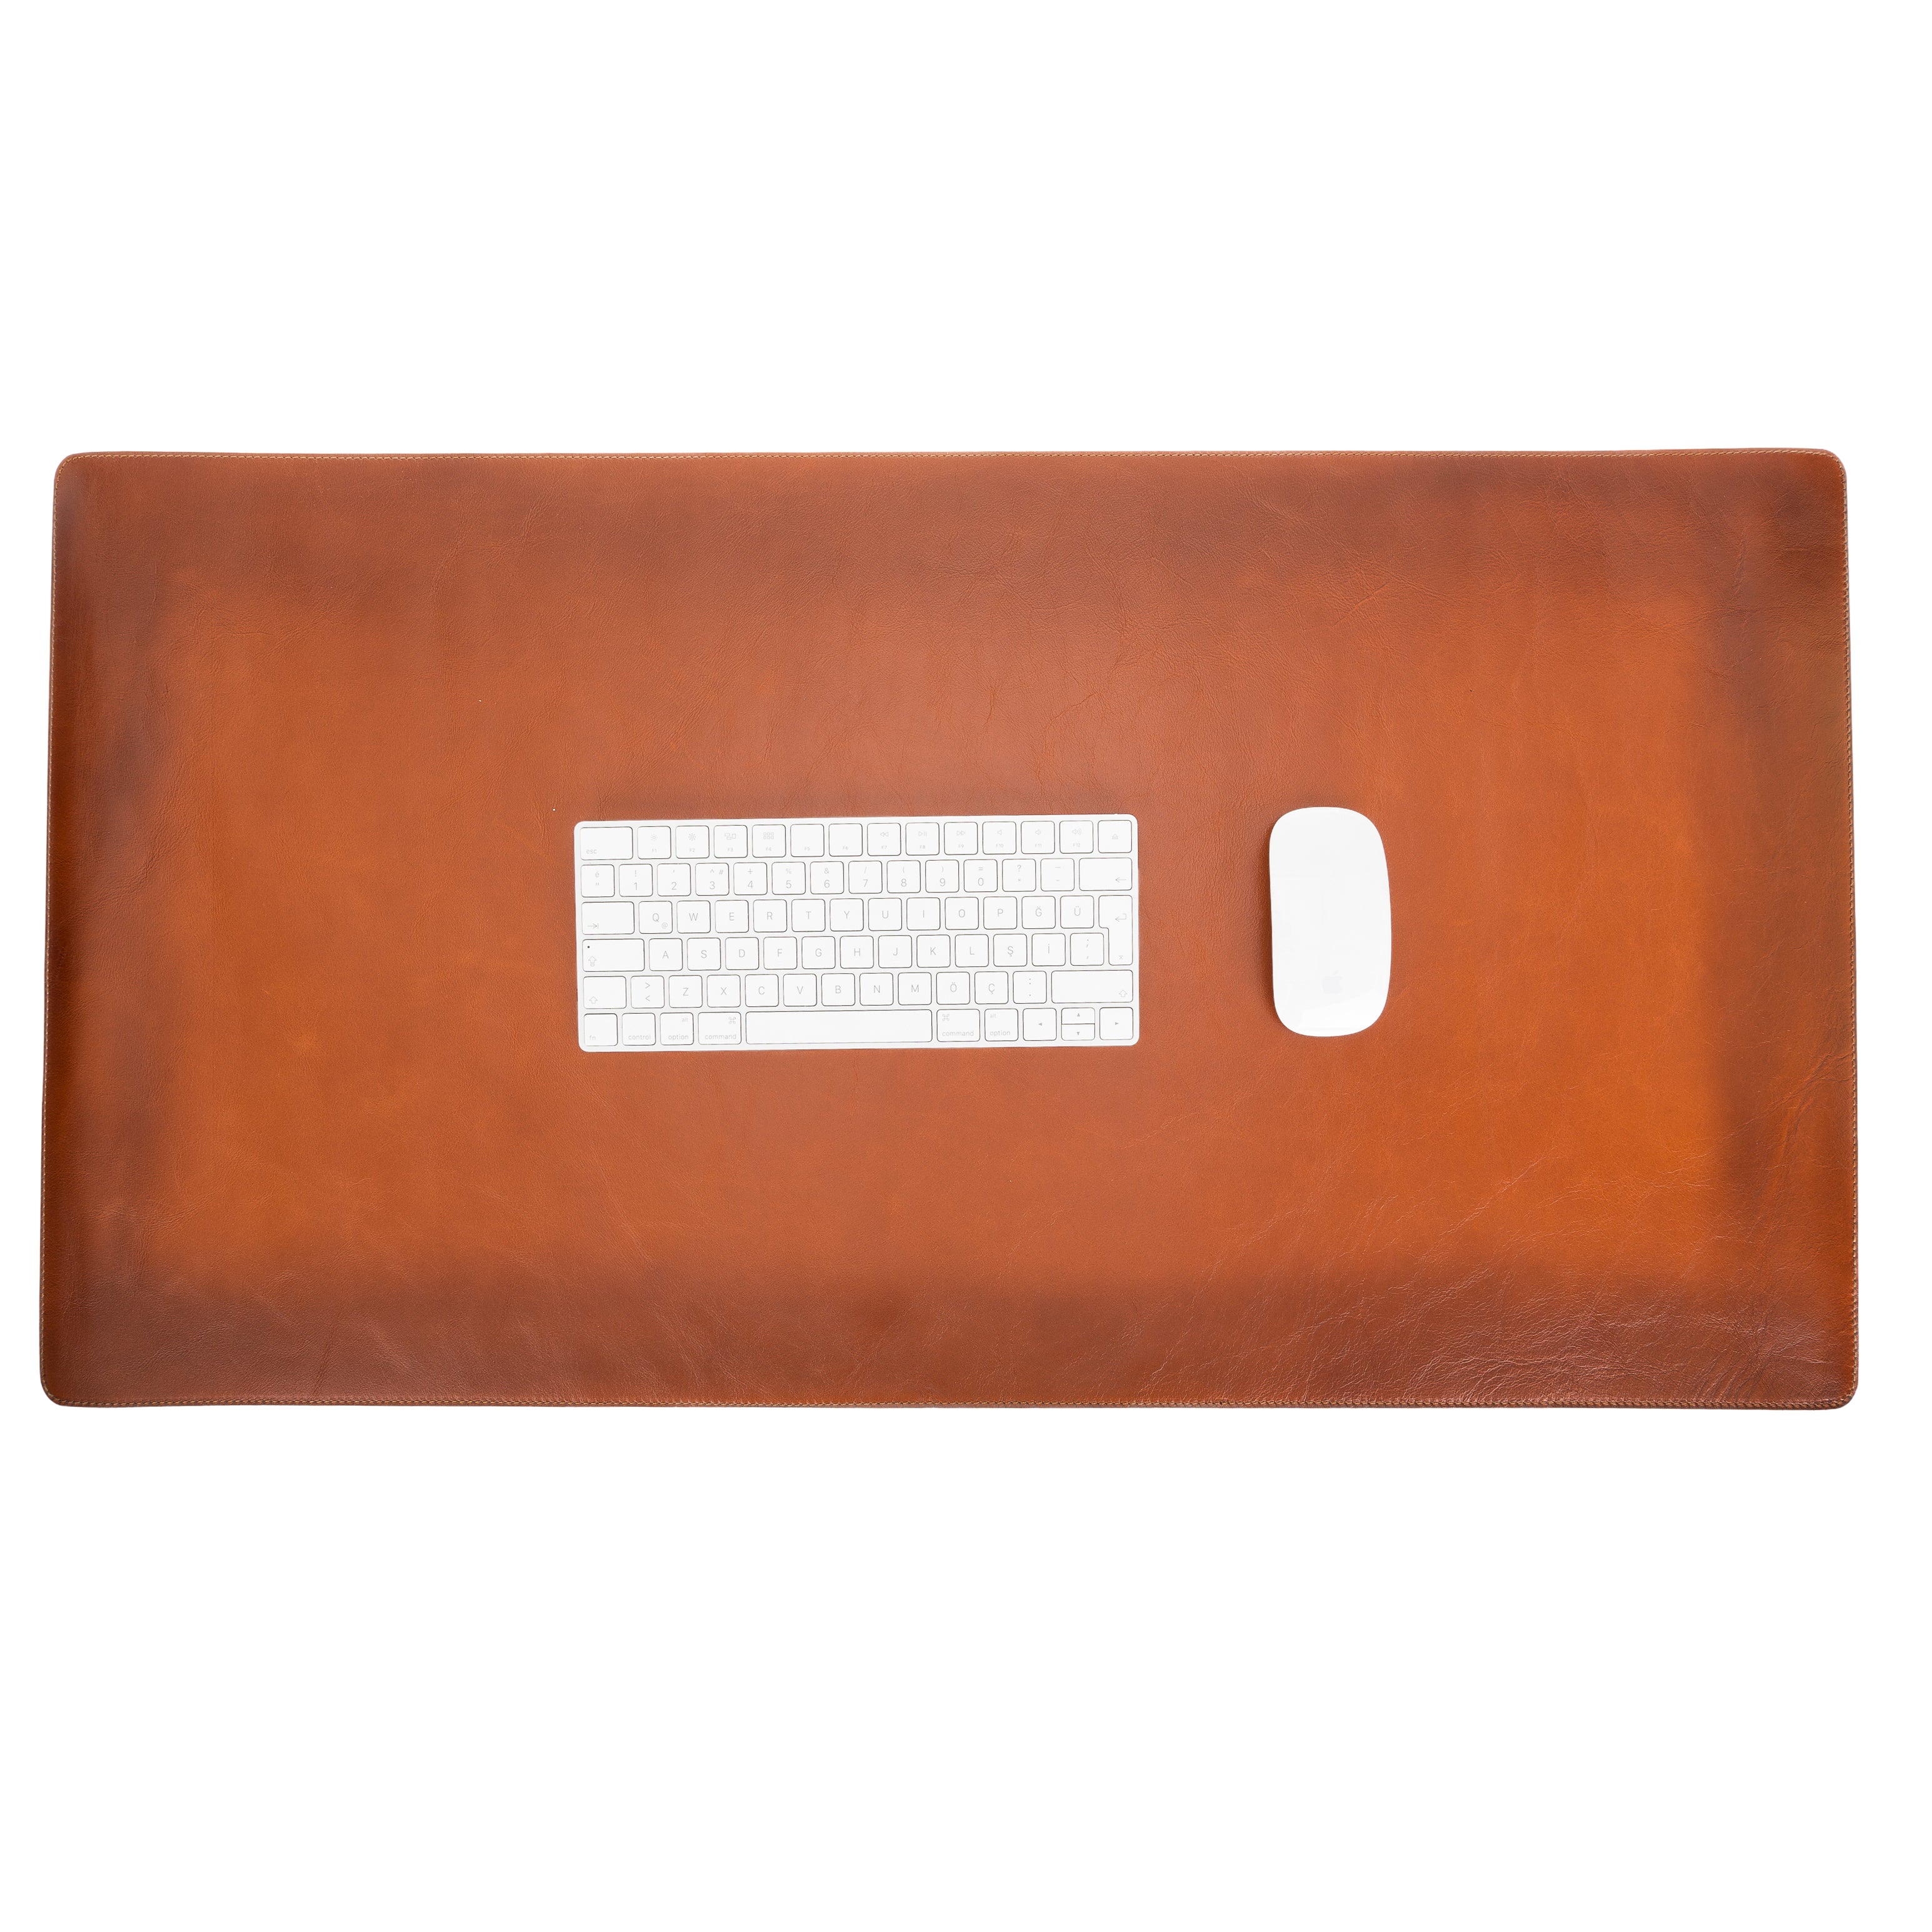 LupinnyLeather Genuine Leather Deskmat, Computer Pad, Office Desk Pad (Brown) 11